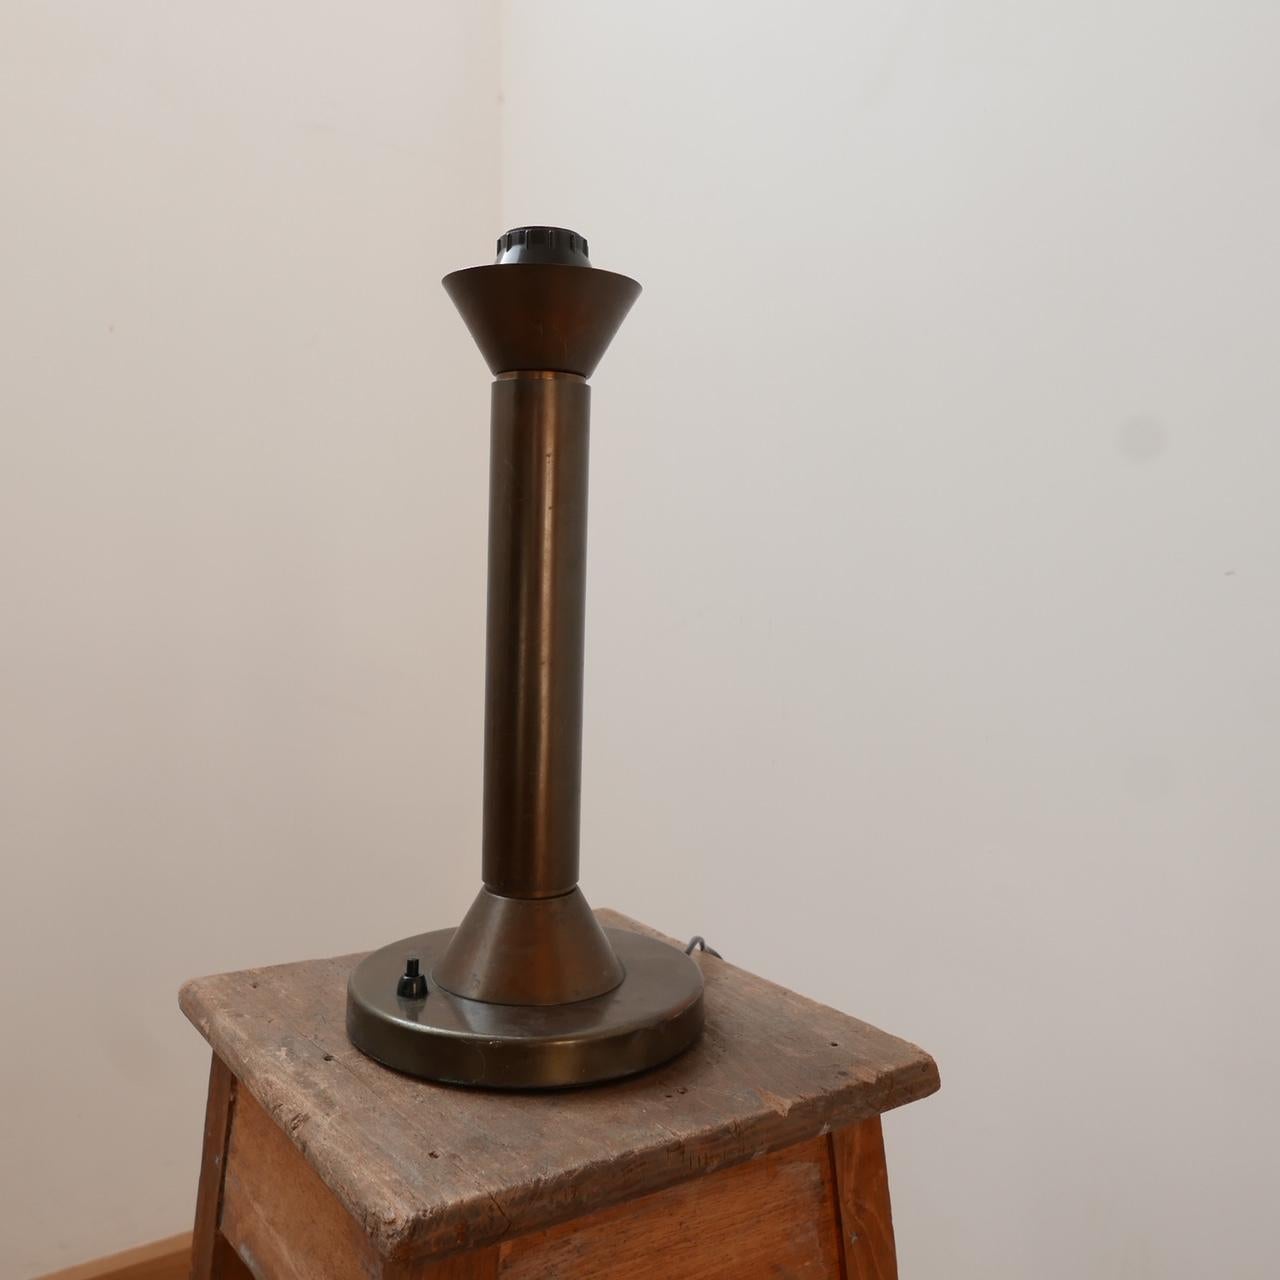 Patinated bronze table lamp. 

Sweden, c1940s. 

Asea logo to base. 

Simple elegant form. 

Some scratches and scuffs commensurate with age but generally good condition. 

Since re-wired and PAT tested. 

Dimensions: 40 height x 18